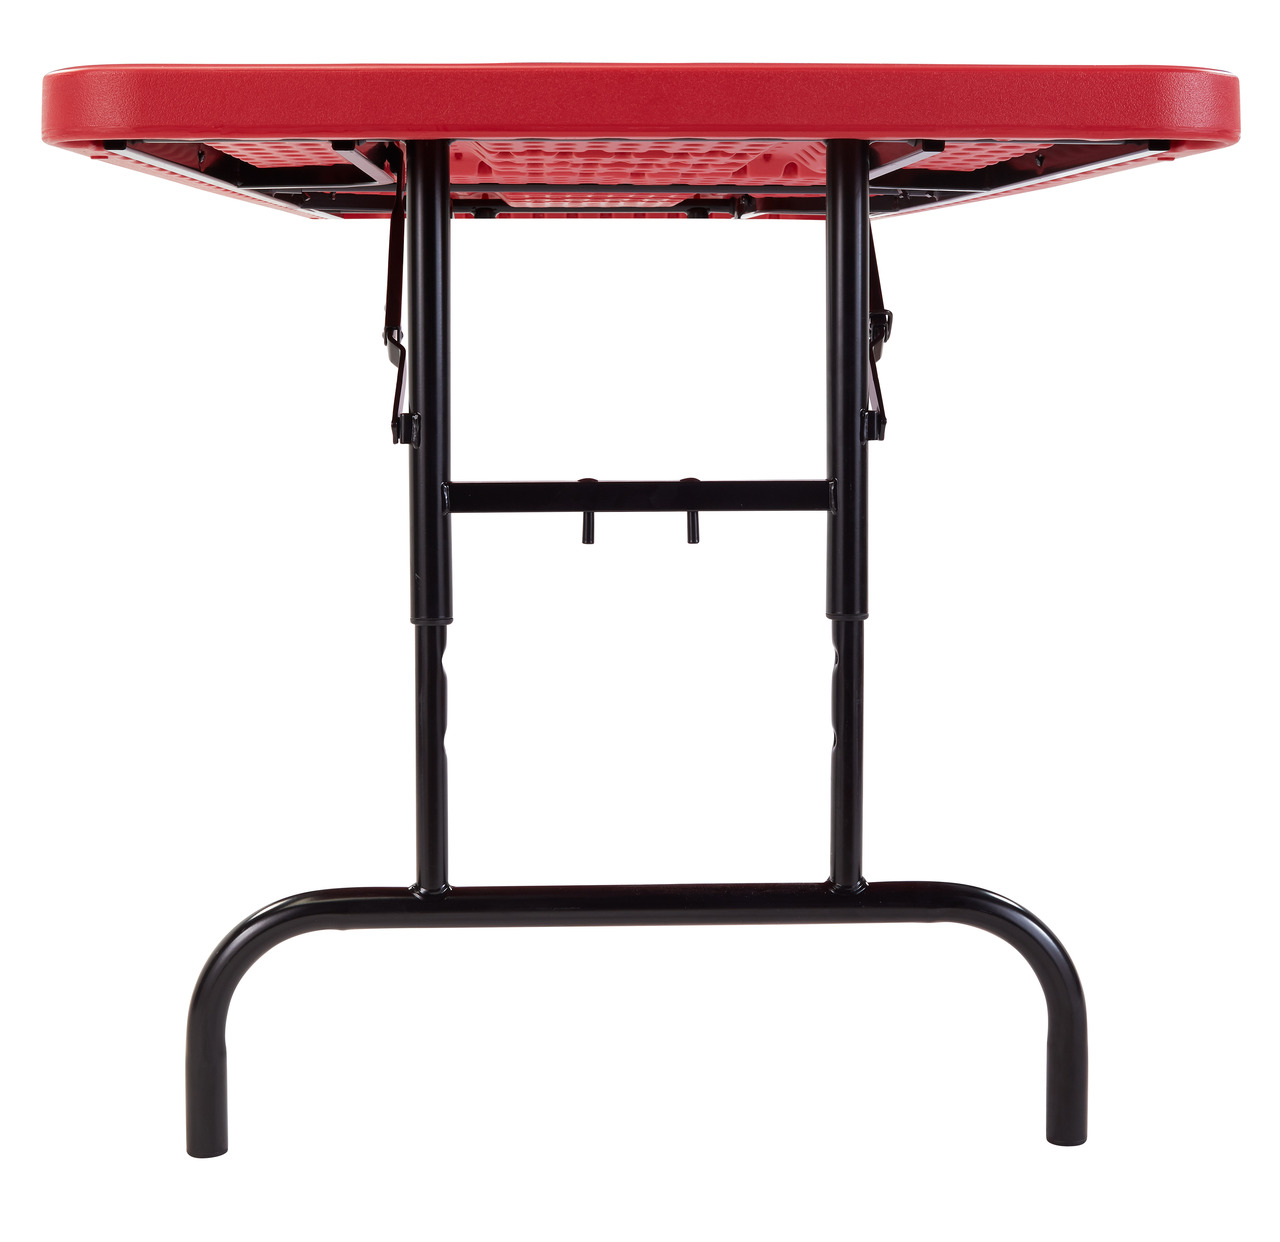 NPS 30" x 72" Height Adjustable Heavy Duty Folding Table - Red Top and Black Frame